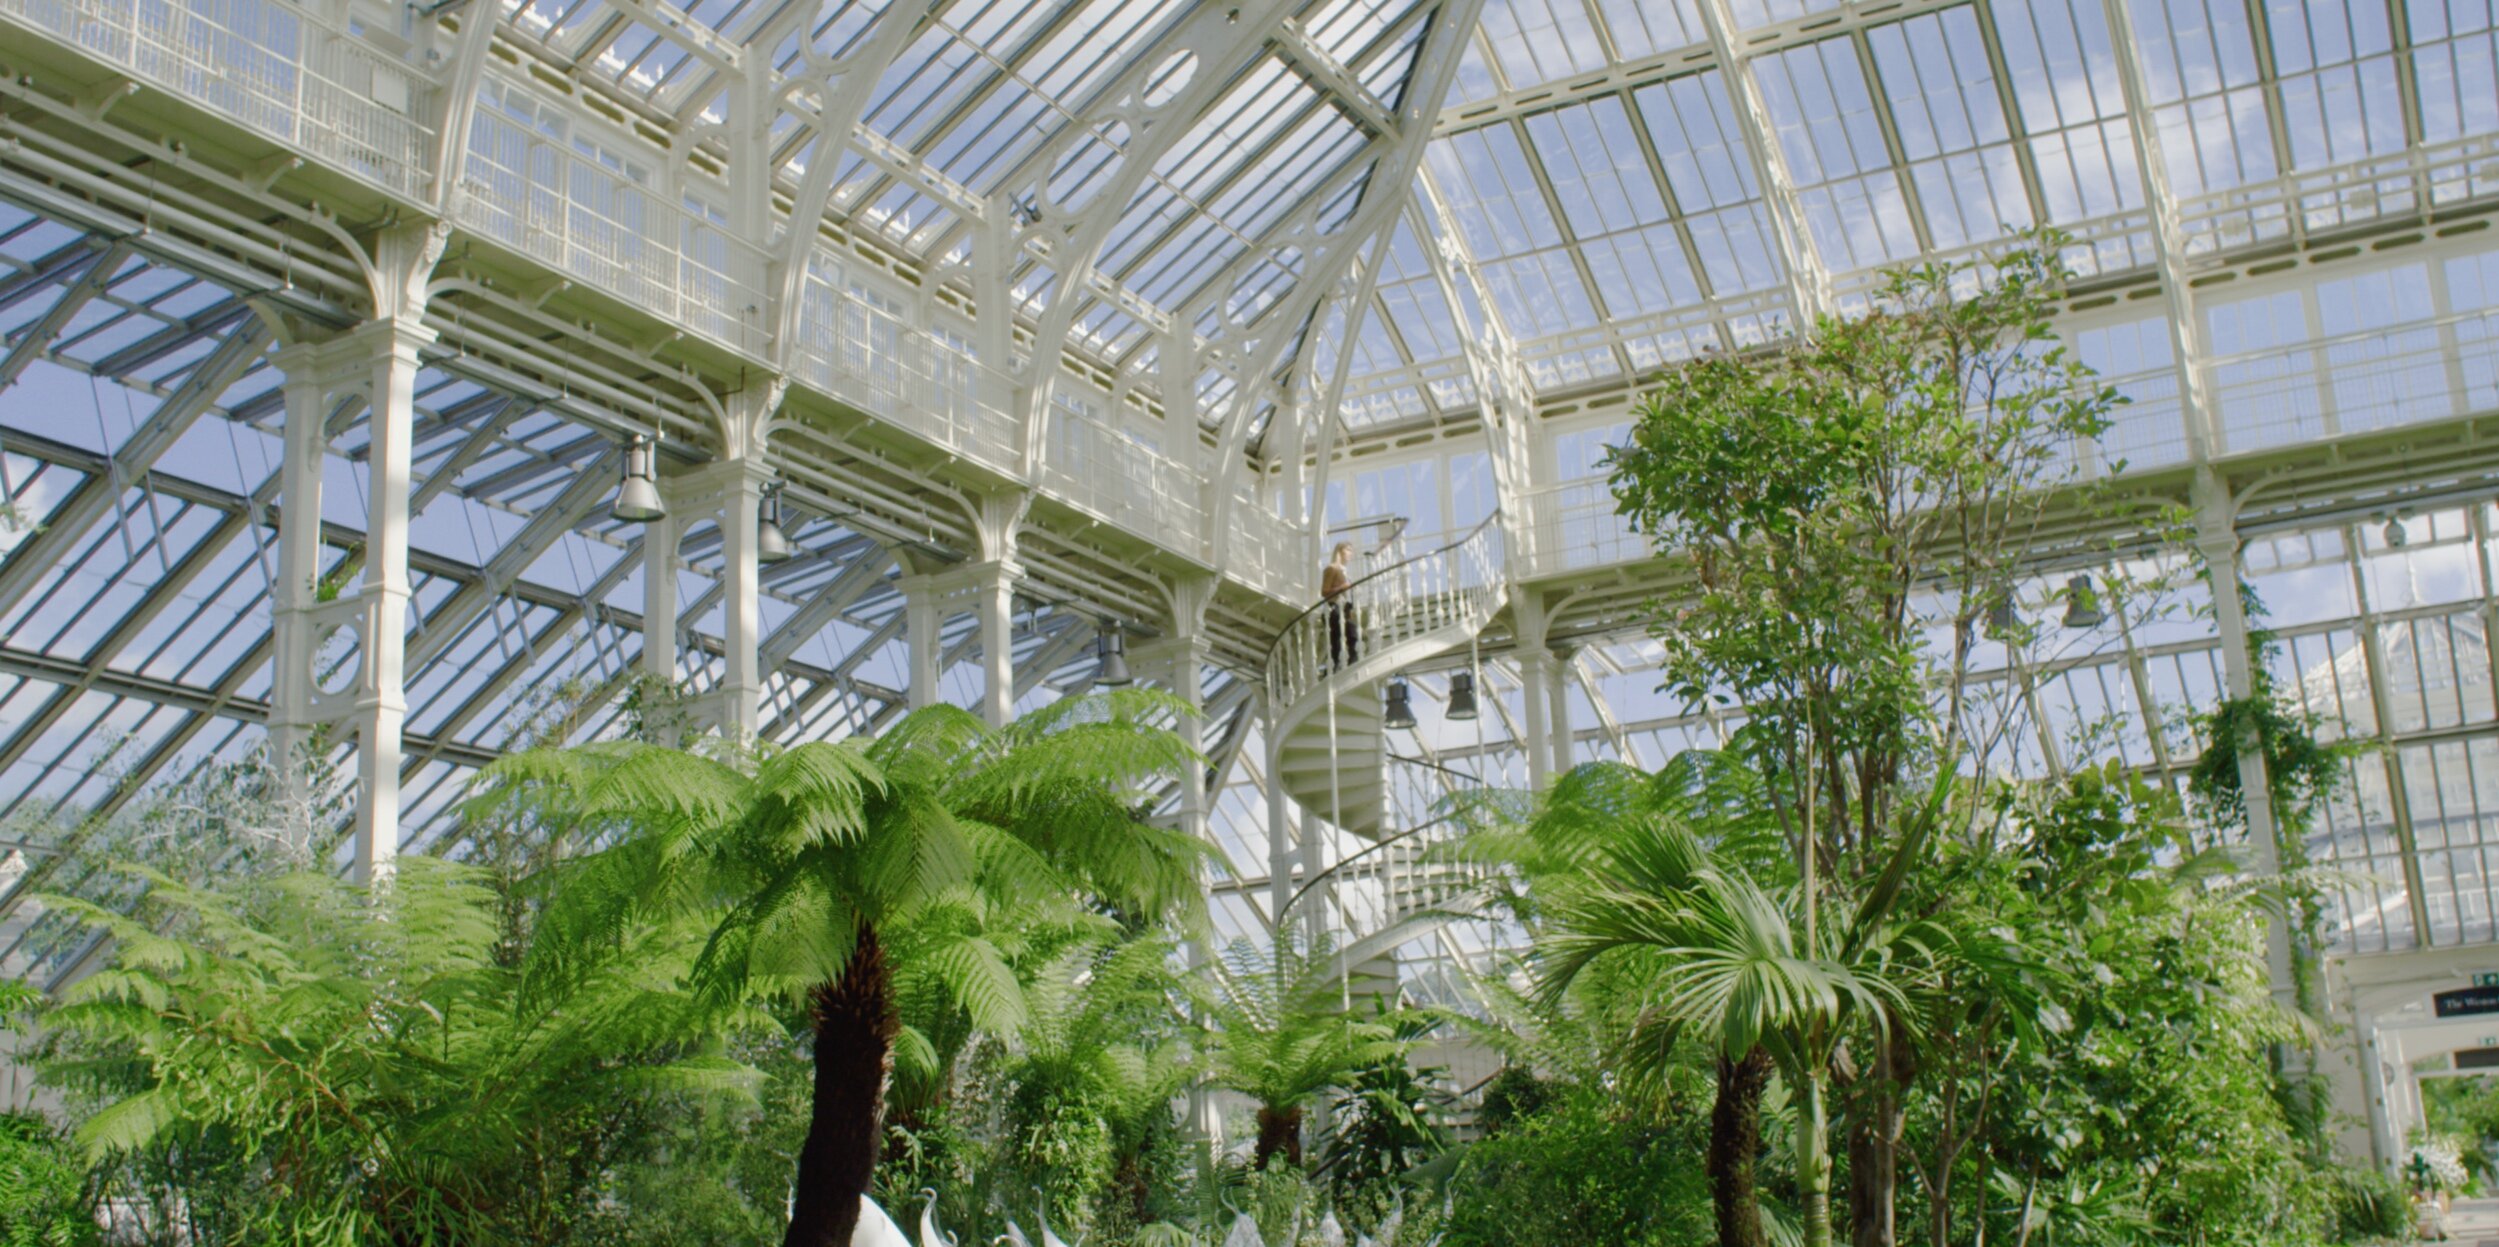 Kew Gardens - The Temperate House